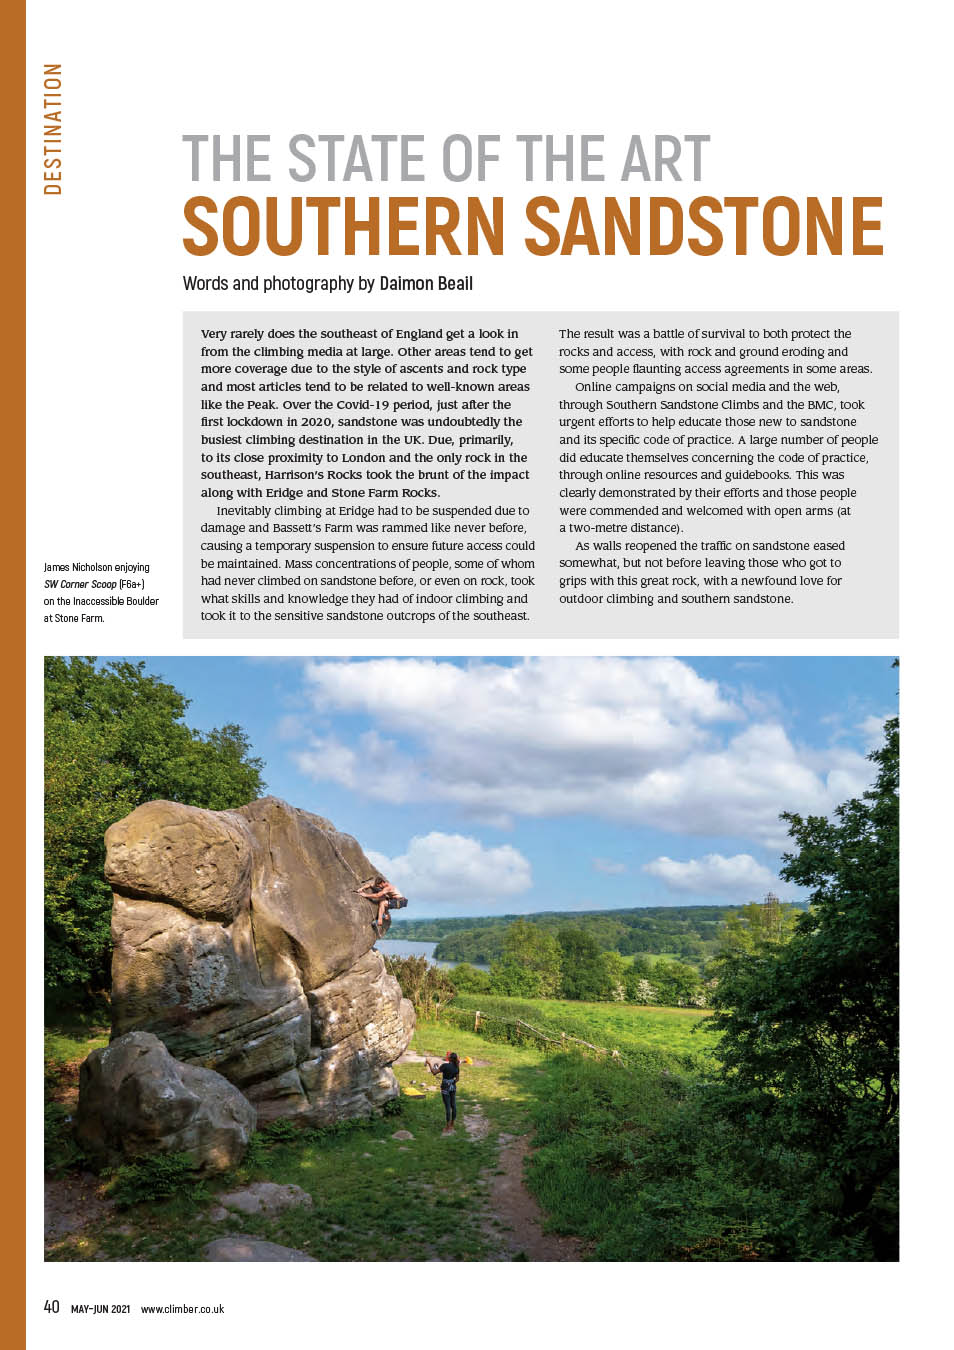 Souther Sandstone